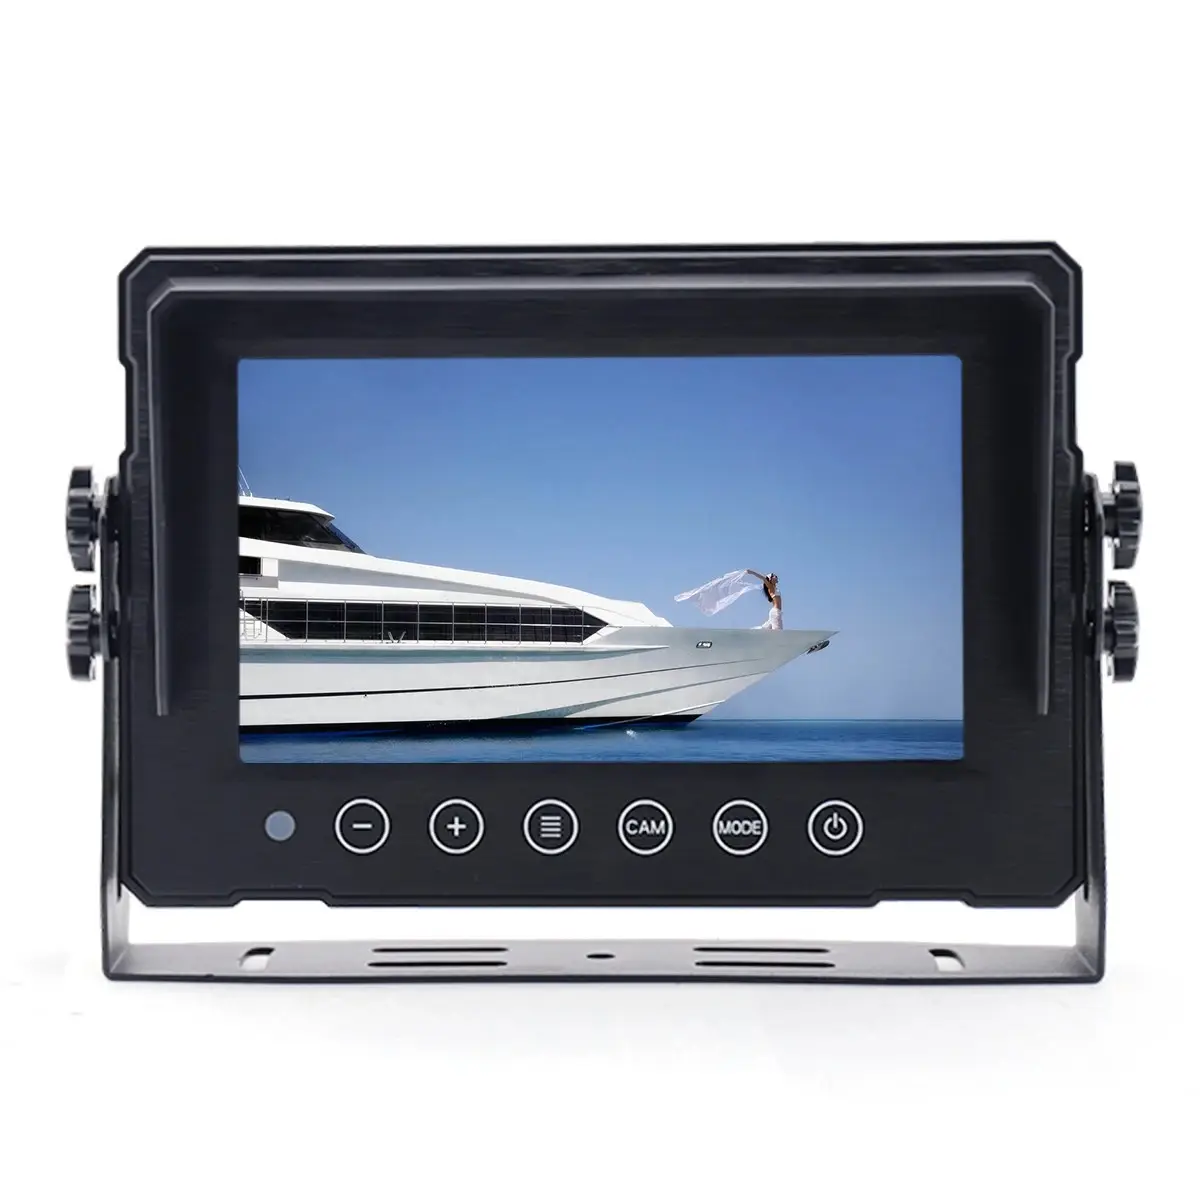 Latest model high quality IP68 waterproof 7 Inch car LCD monitor for car reversing aid system on stock monitor for car